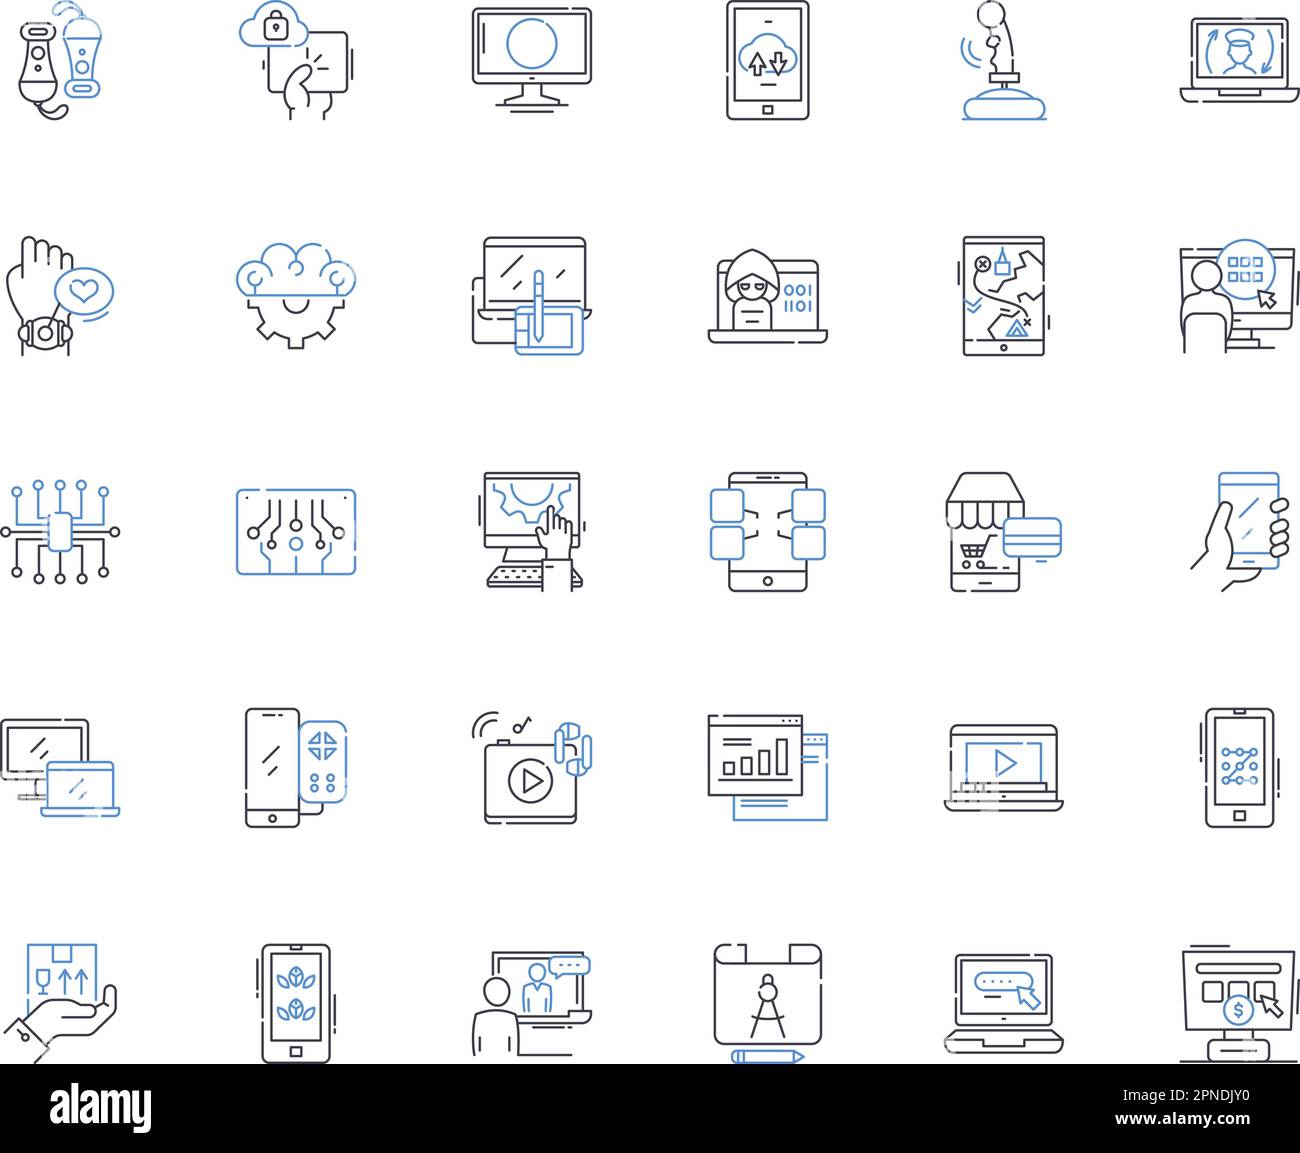 Appliances line icons collection. Refrigerator, Microwave, Dishwasher, Oven, Freezer, Stove, Blender vector and linear illustration. Toaster,Coffee Stock Vector